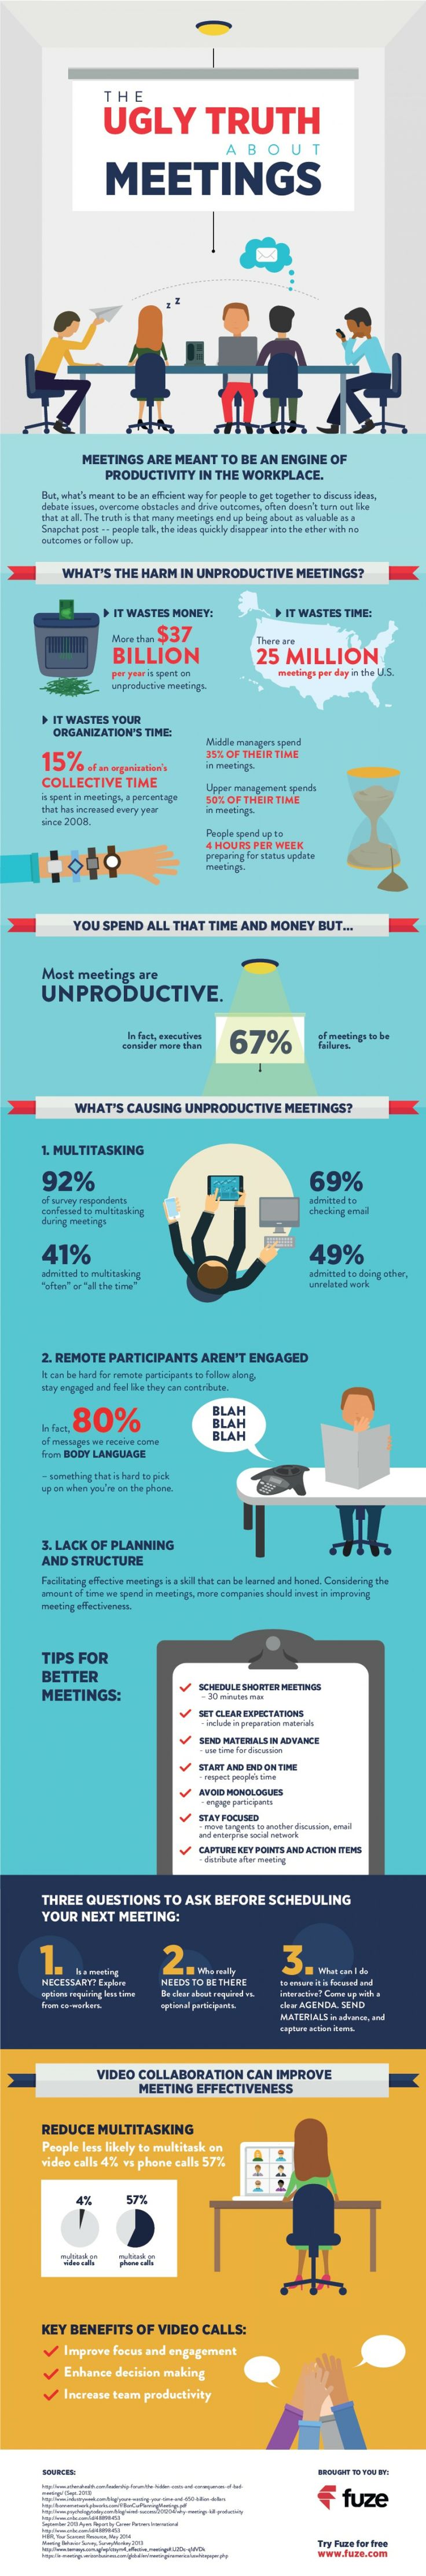 ugly truth about meetings infographic, effective communication strategies 